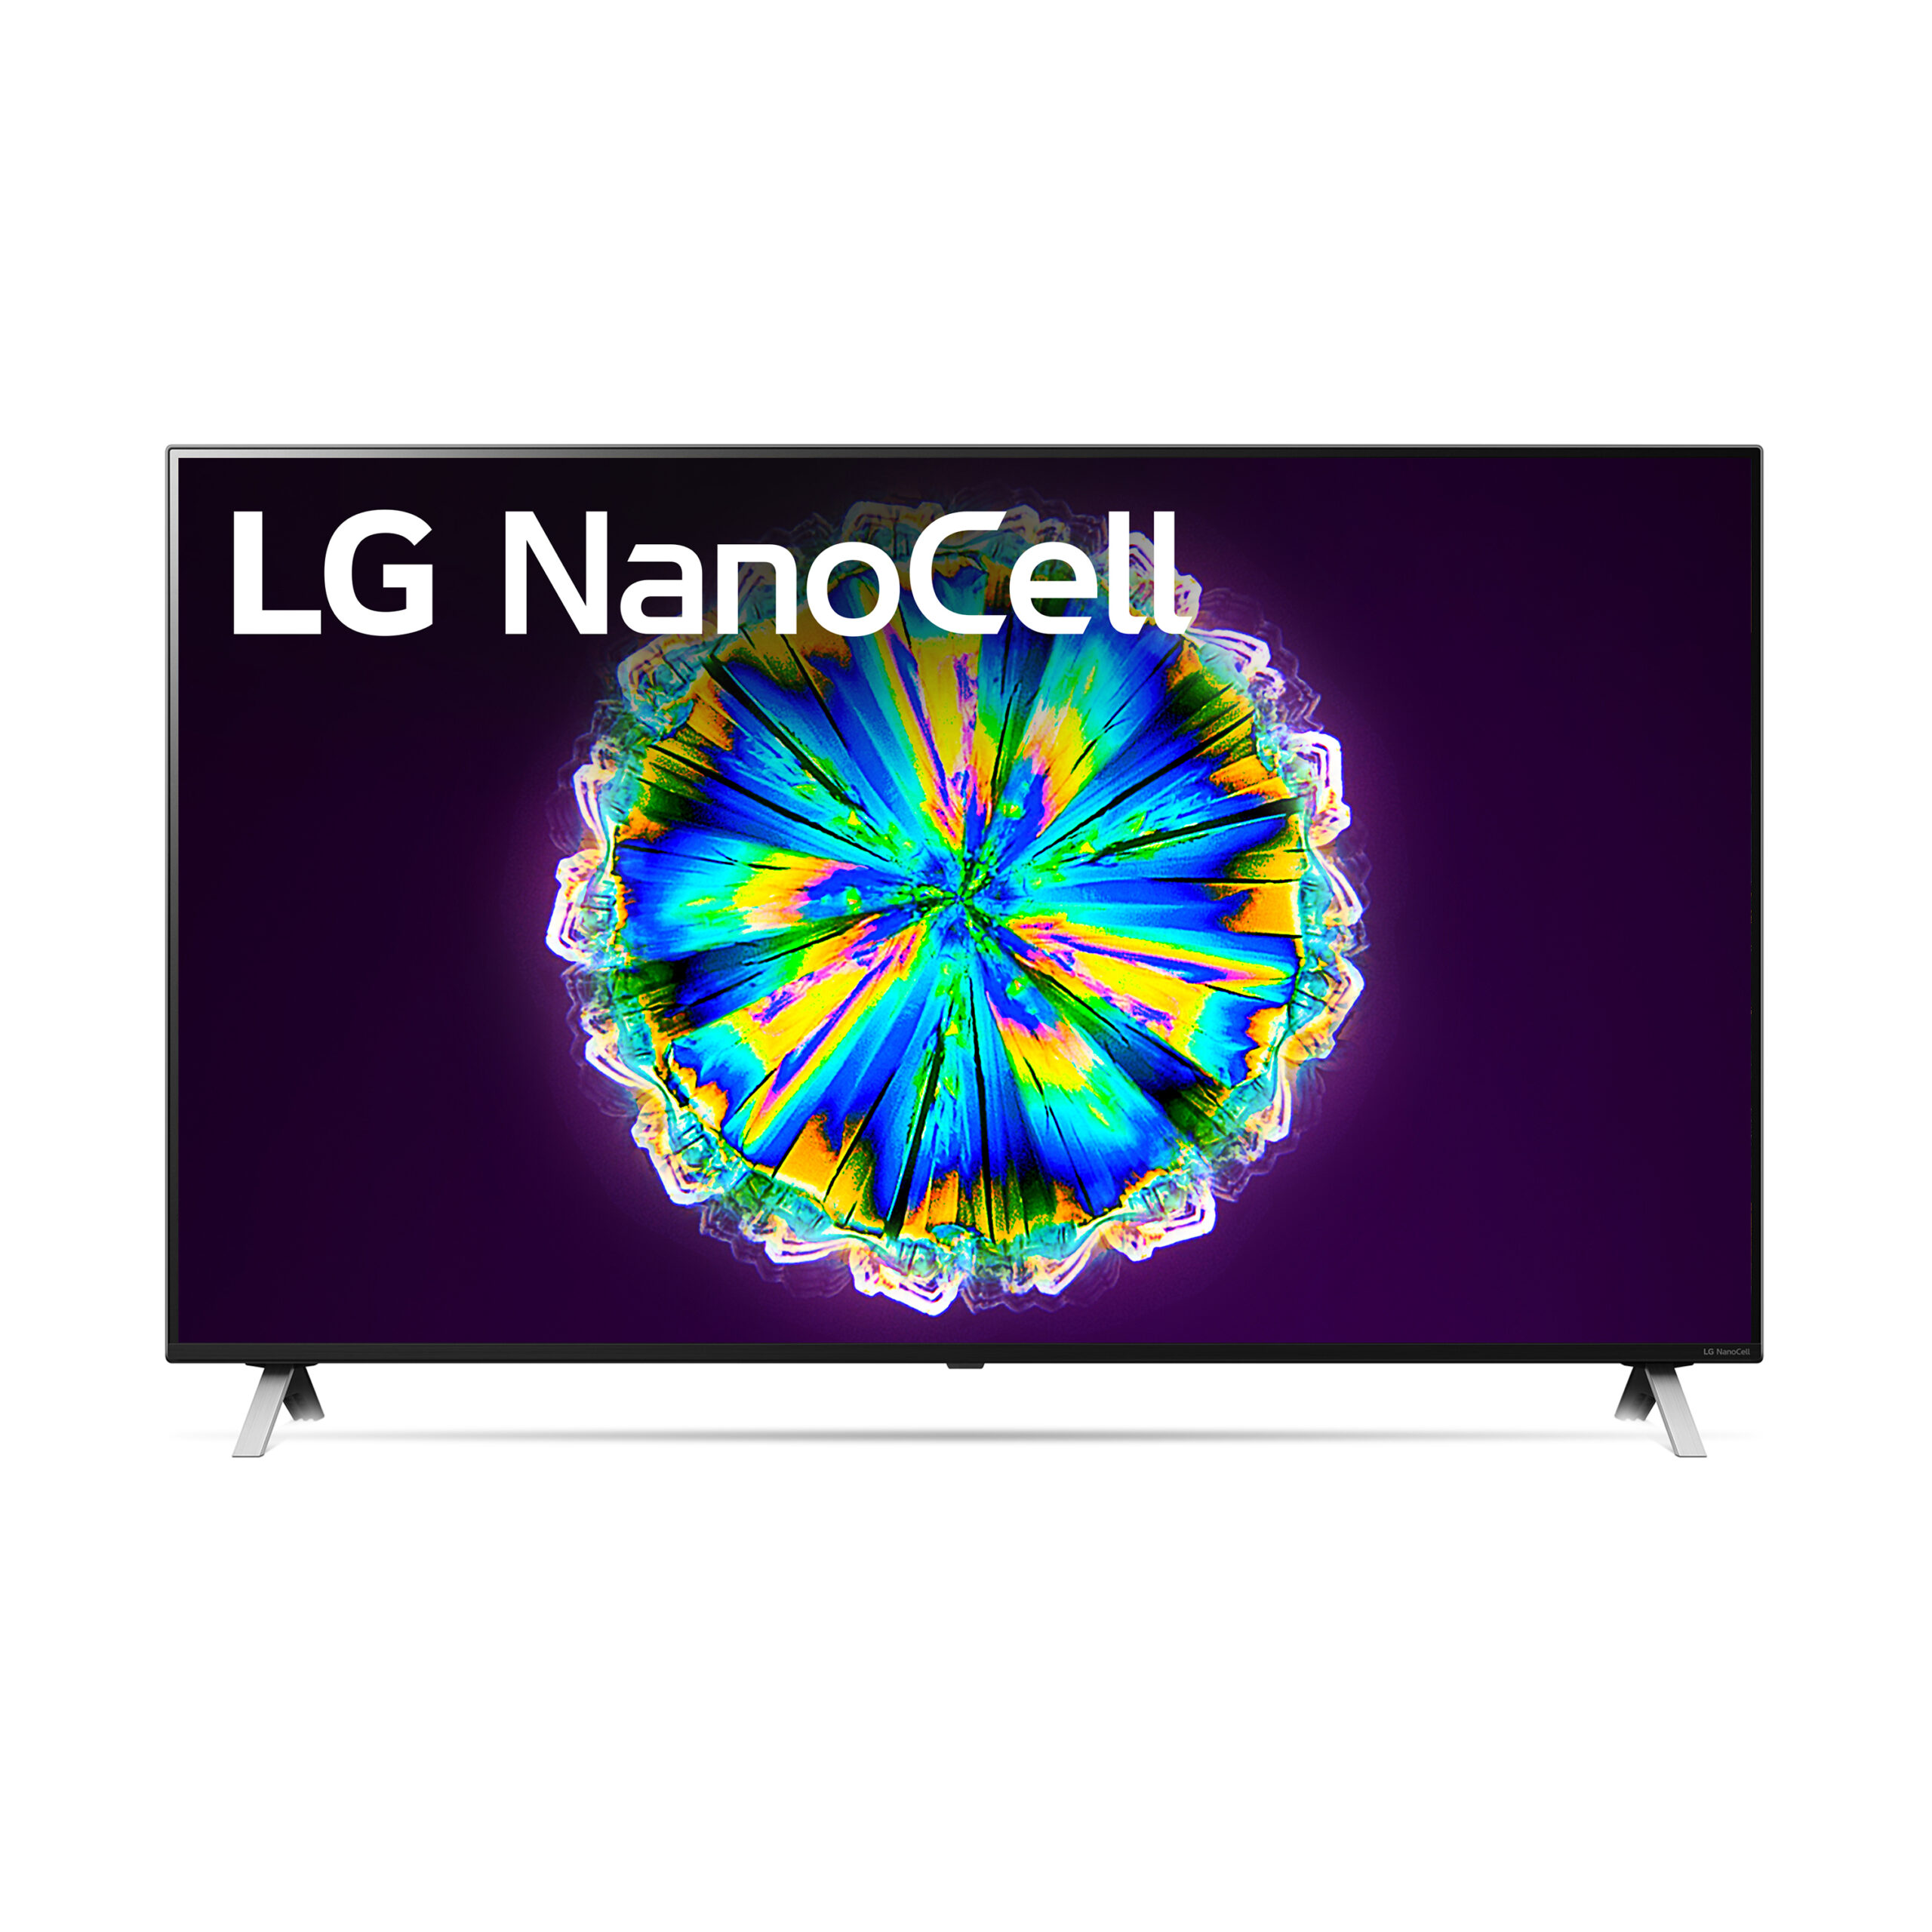 LG's NanoCell TV is a good buy for the super bowl